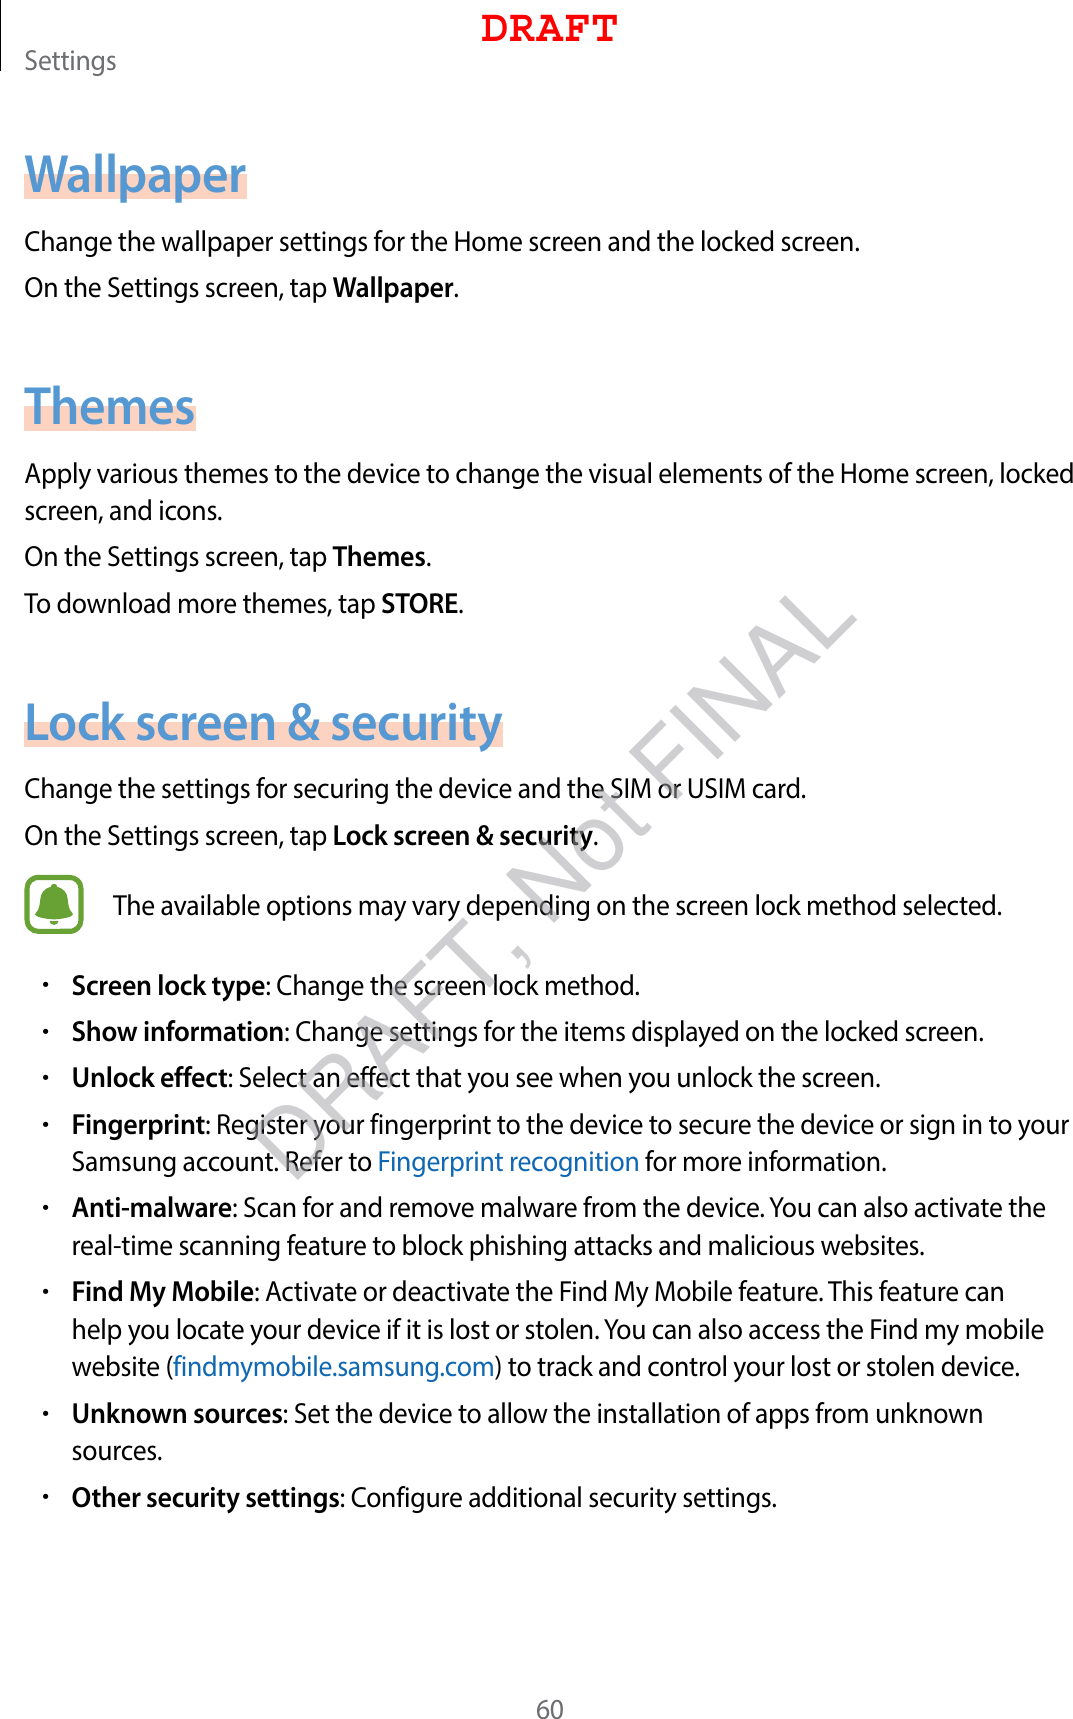 Settings60WallpaperChange the wallpaper settings for the Home screen and the locked screen.On the Settings screen, tap Wallpaper.ThemesApply various themes to the device to change the visual elements of the Home screen, locked screen, and icons.On the Settings screen, tap Themes.To download more themes, tap STORE.Lock screen &amp; securityChange the settings for securing the device and the SIM or USIM card.On the Settings screen, tap Lock screen &amp; security.The available options may vary depending on the screen lock method selected.•Screen lock type: Change the screen lock method.•Show information: Change settings for the items displayed on the locked screen.•Unlock effect: Select an effect that you see when you unlock the screen.•Fingerprint: Register your fingerprint to the device to secure the device or sign in to your Samsung account. Refer to Fingerprint recognition for more information.•Anti-malware: Scan for and remove malware from the device. You can also activate the real-time scanning feature to block phishing attacks and malicious websites.•Find My Mobile: Activate or deactivate the Find My Mobile feature. This feature can help you locate your device if it is lost or stolen. You can also access the Find my mobile website (findmymobile.samsung.com) to track and control your lost or stolen device.•Unknown sources: Set the device to allow the installation of apps from unknown sources.•Other security settings: Configure additional security settings.DRAFTDRAFT, Not FINAL